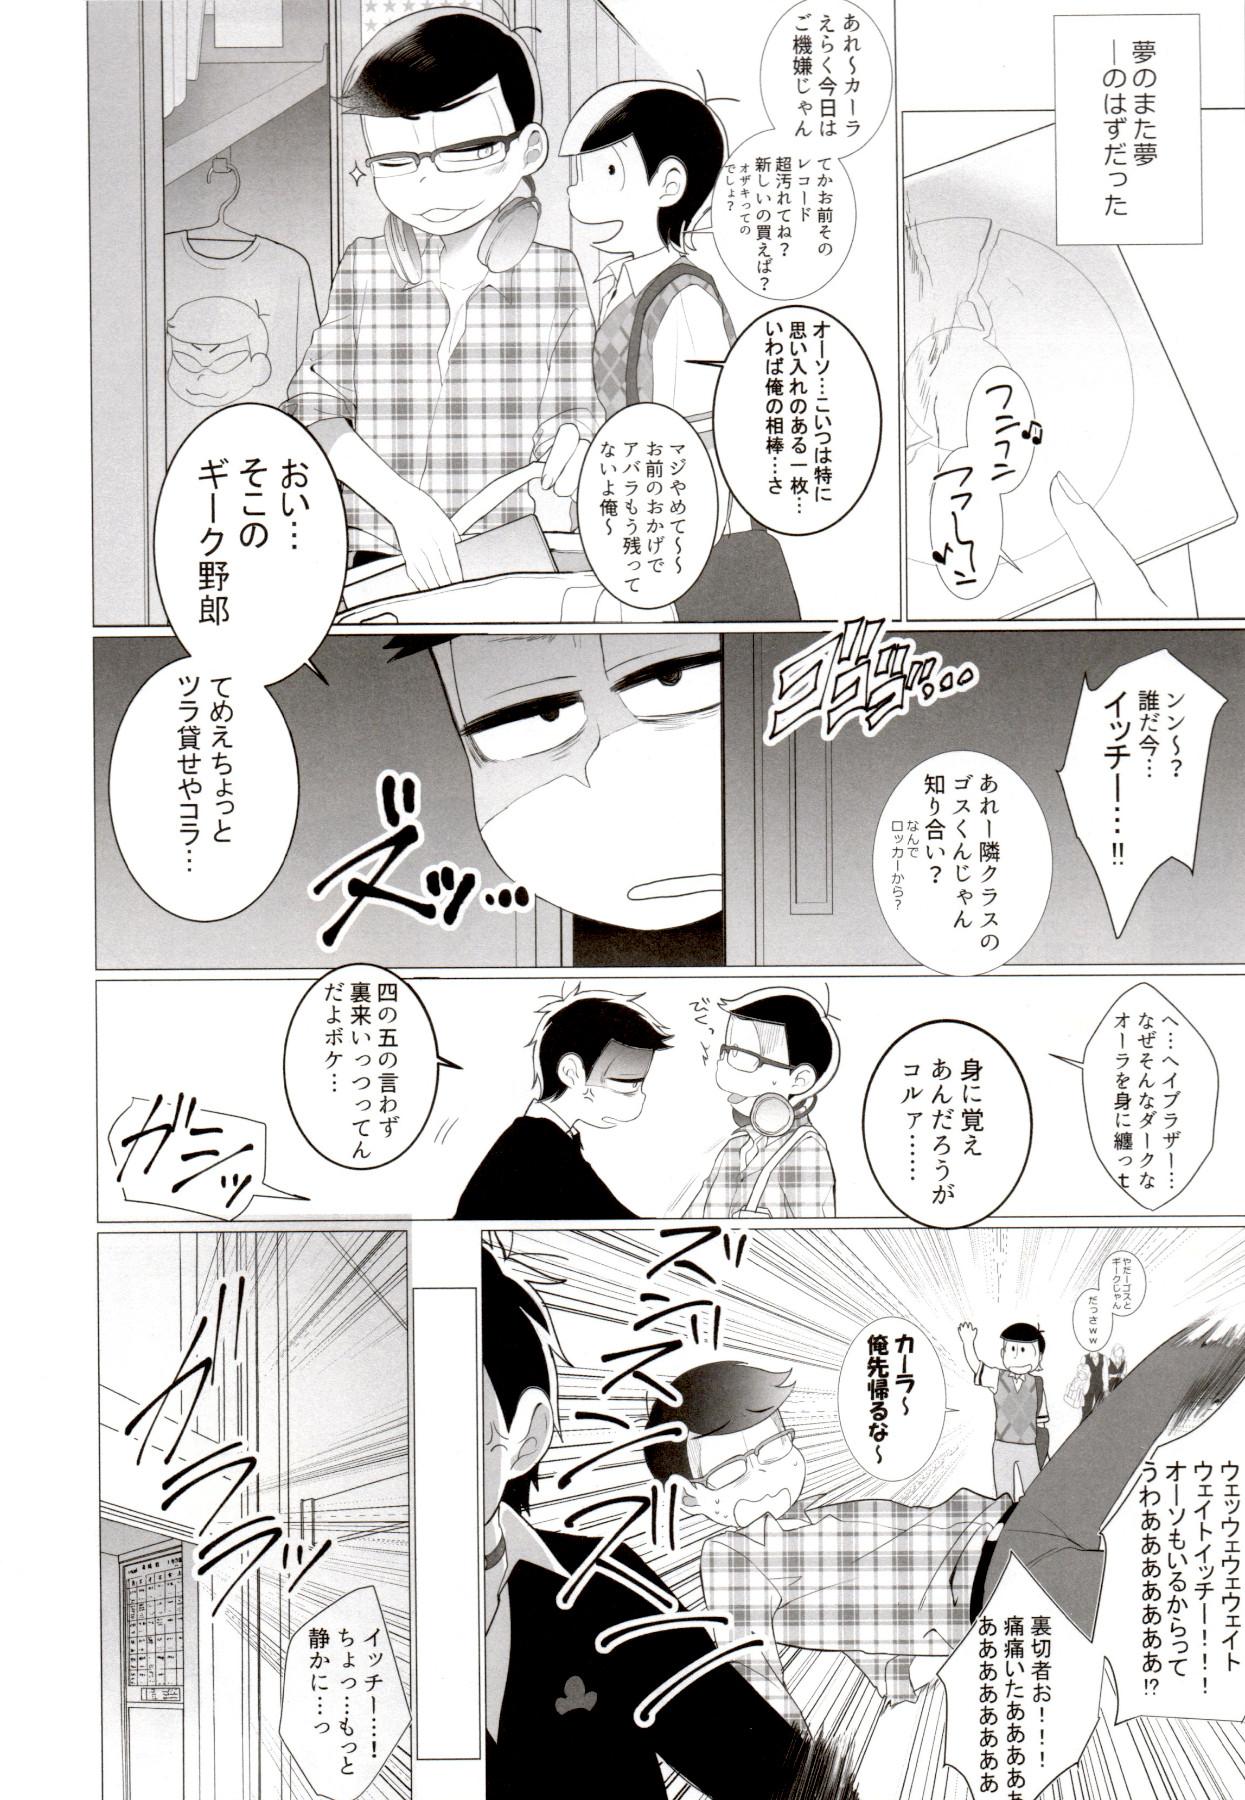 Web Cam IT IS THE COLORFUL LIFE 2 - Osomatsu san Orgasmo - Page 5